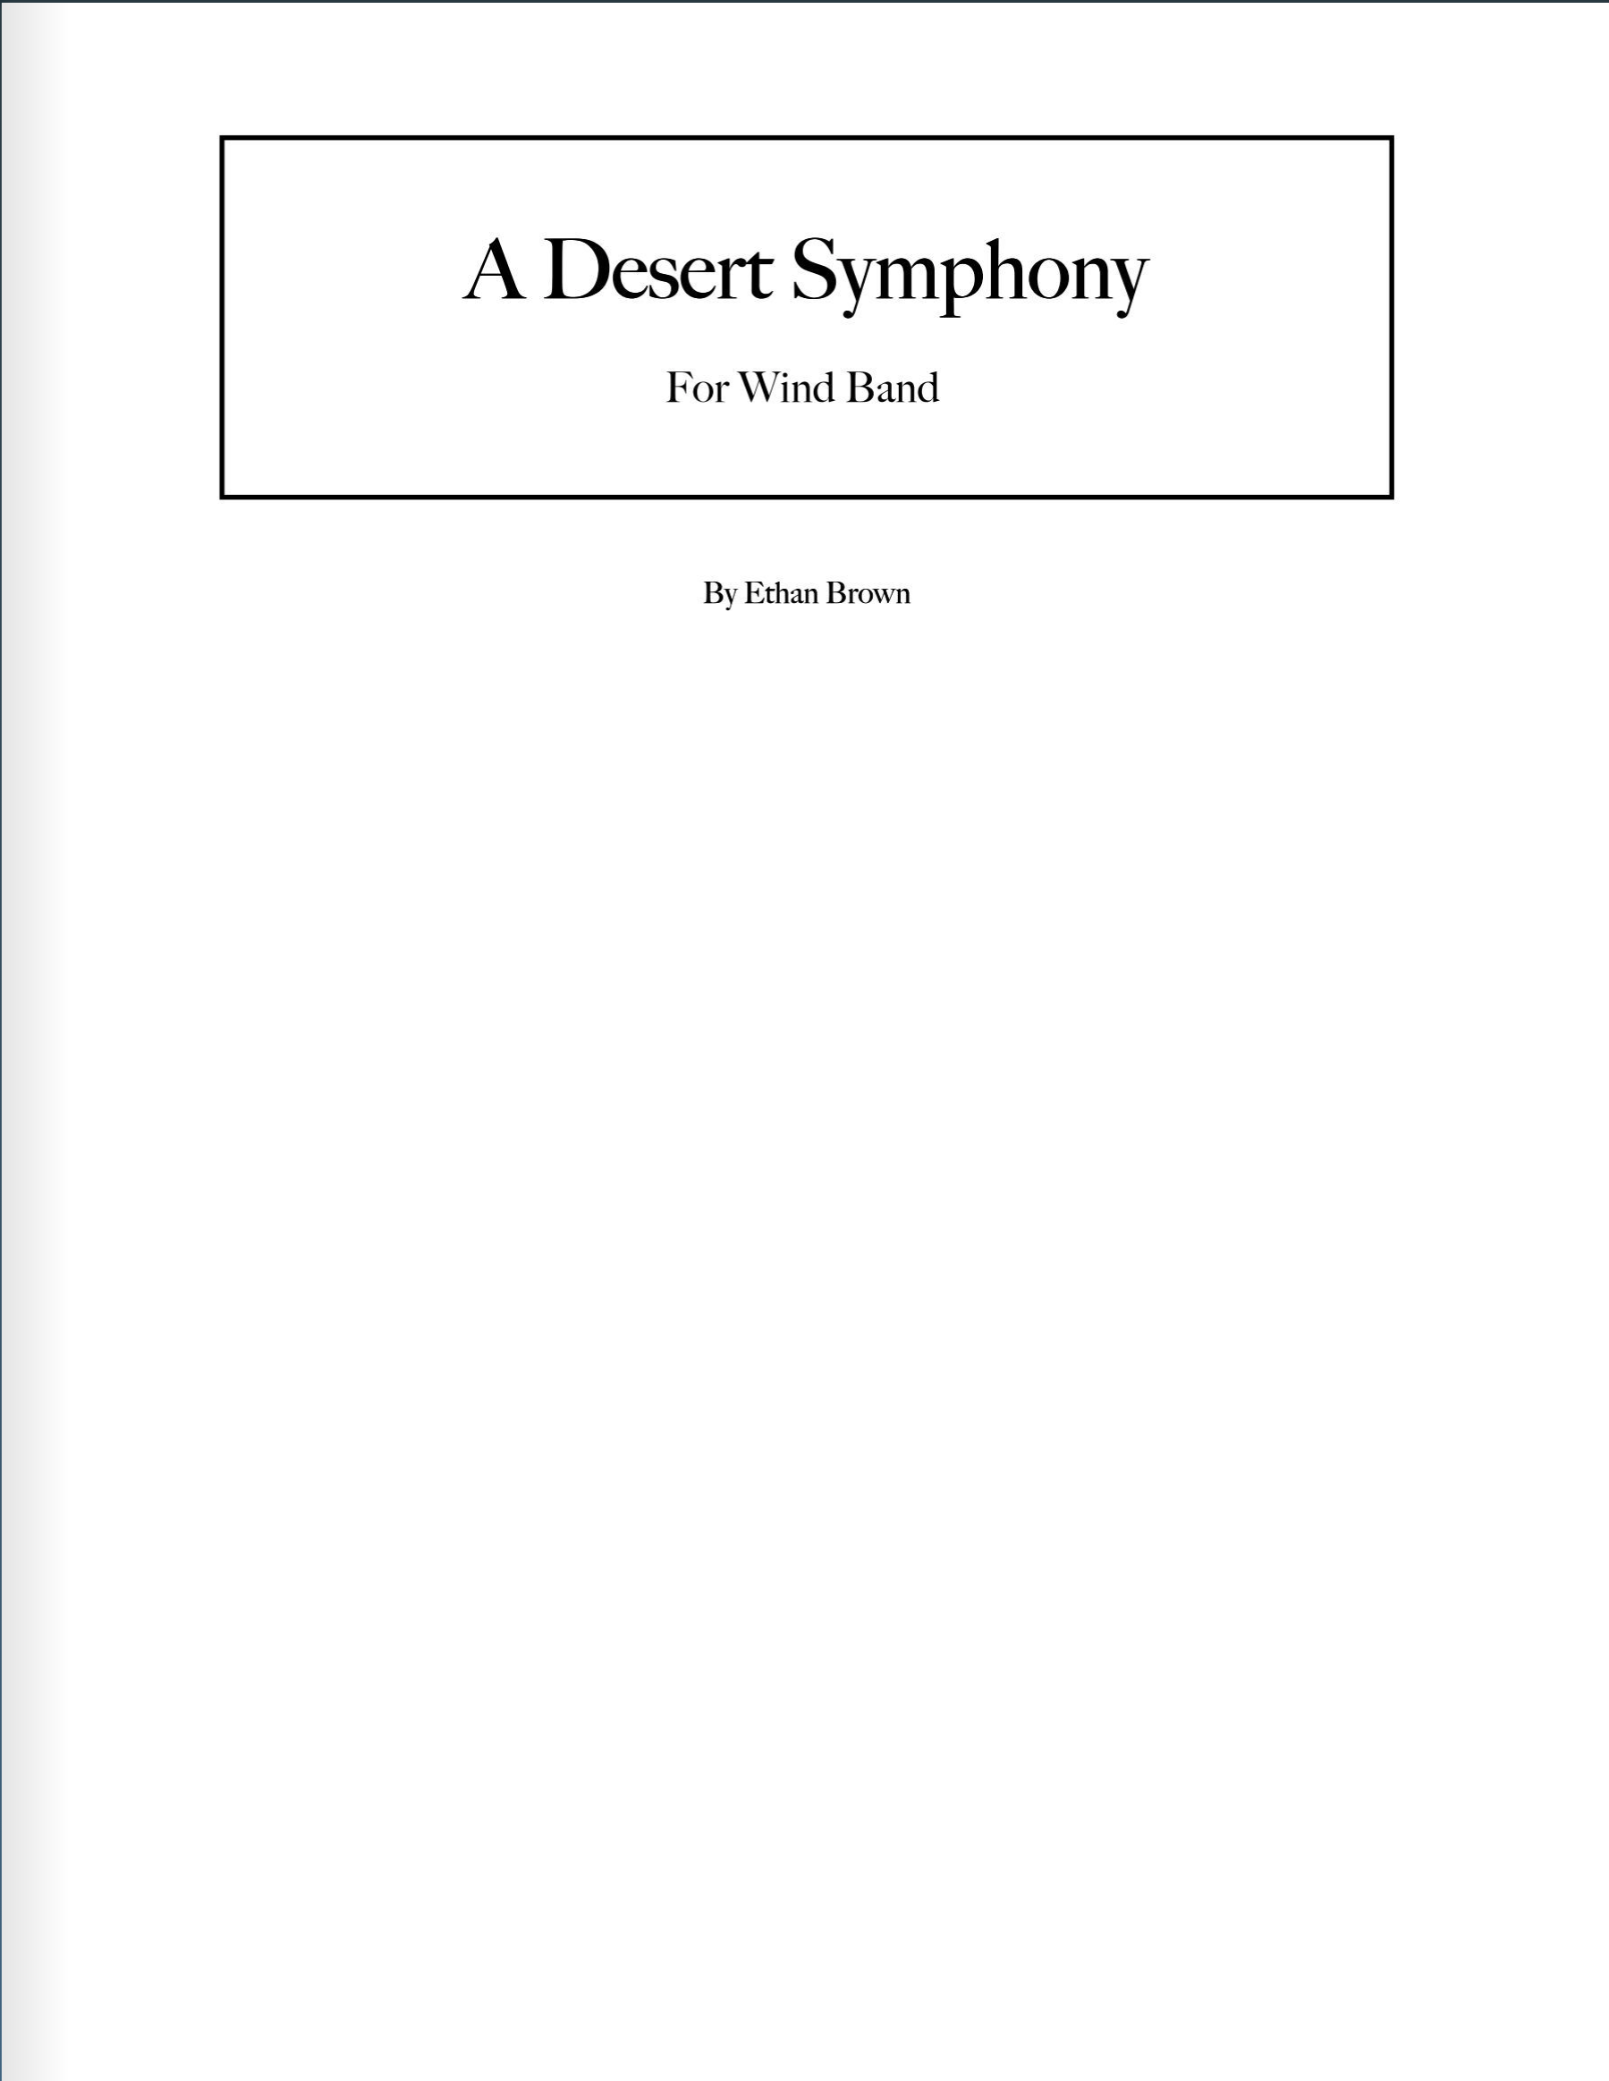 A Desert Symphony (Score Only) by Ethan Brown